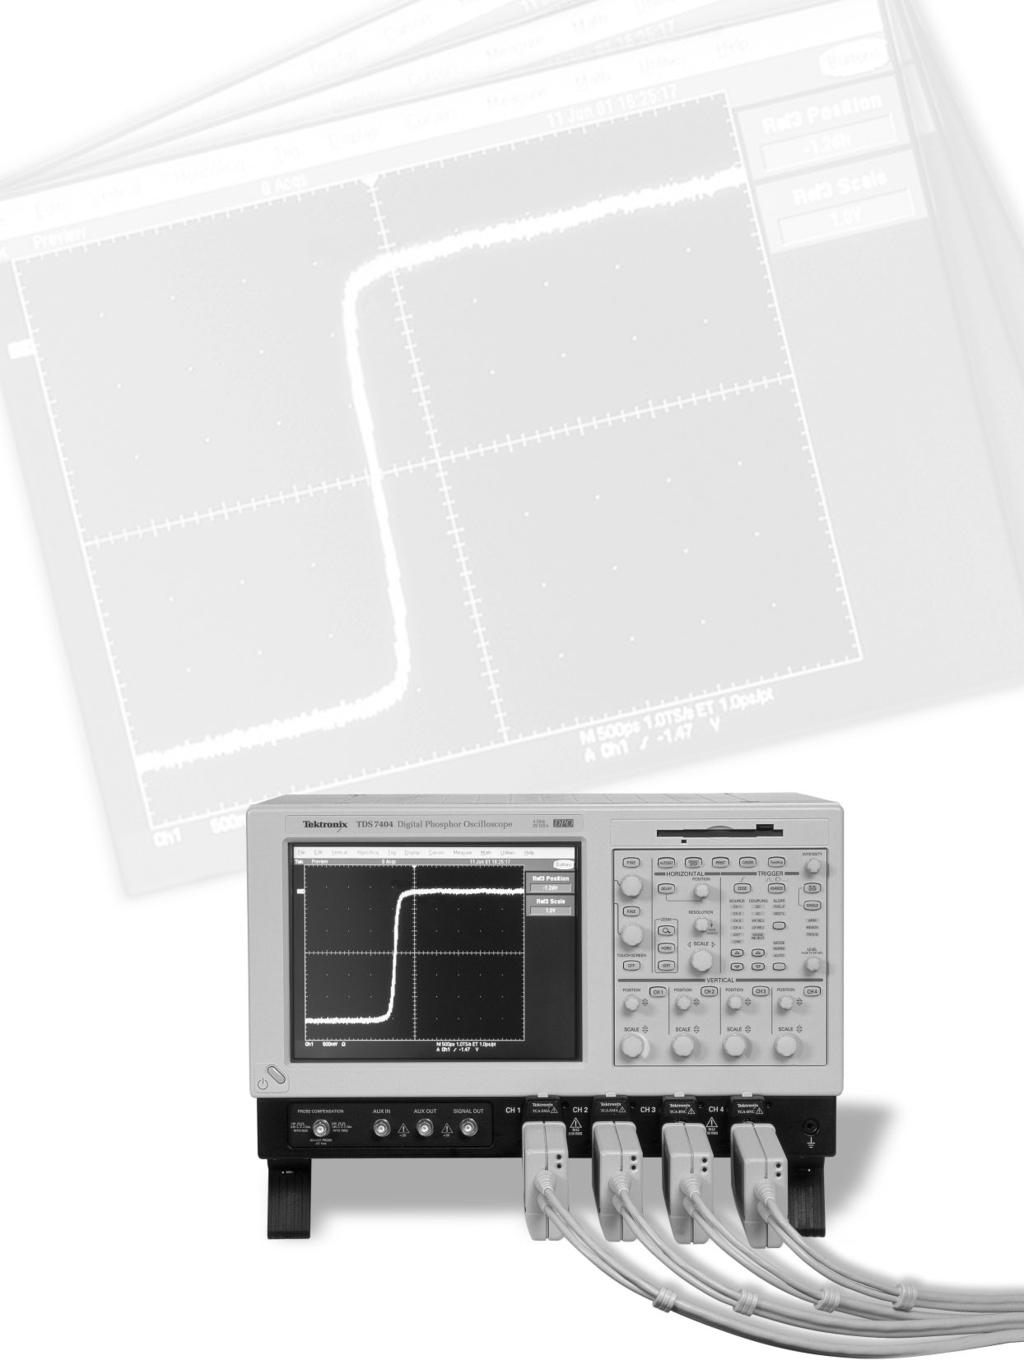 Automation Full automation Automating oscilloscope calibration is possibly one of the biggest productivity enhancements that can be realised in many calibration labs.